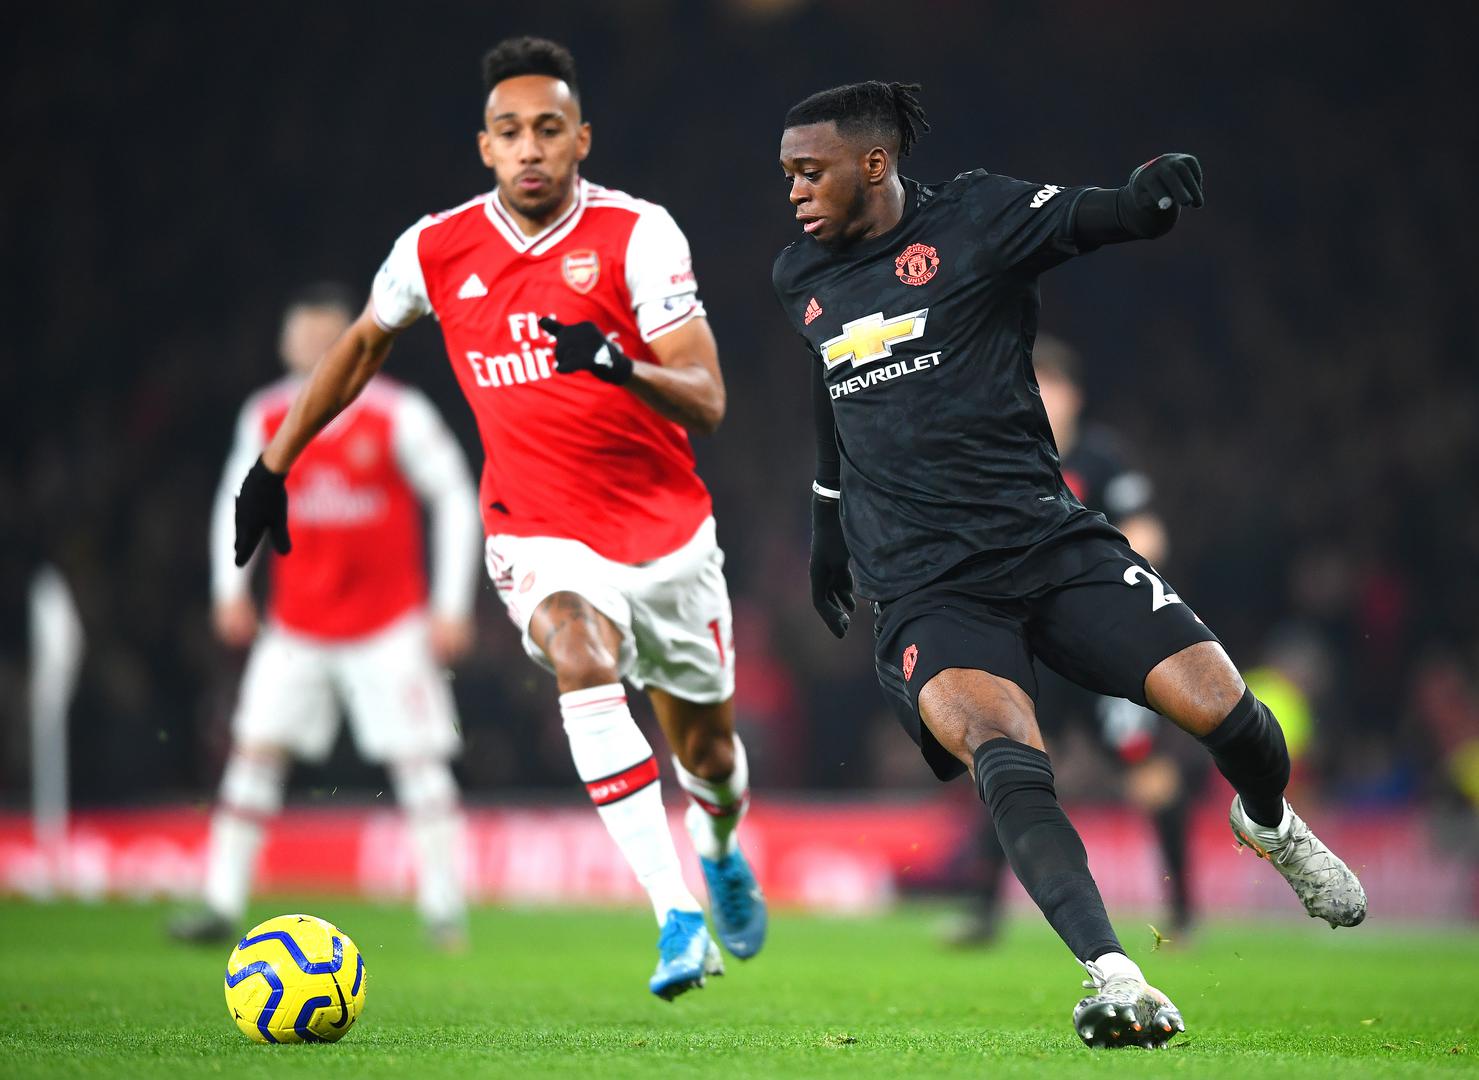 Arsenal V Manchester United 01 January 2020 Match Gallery Manchester United